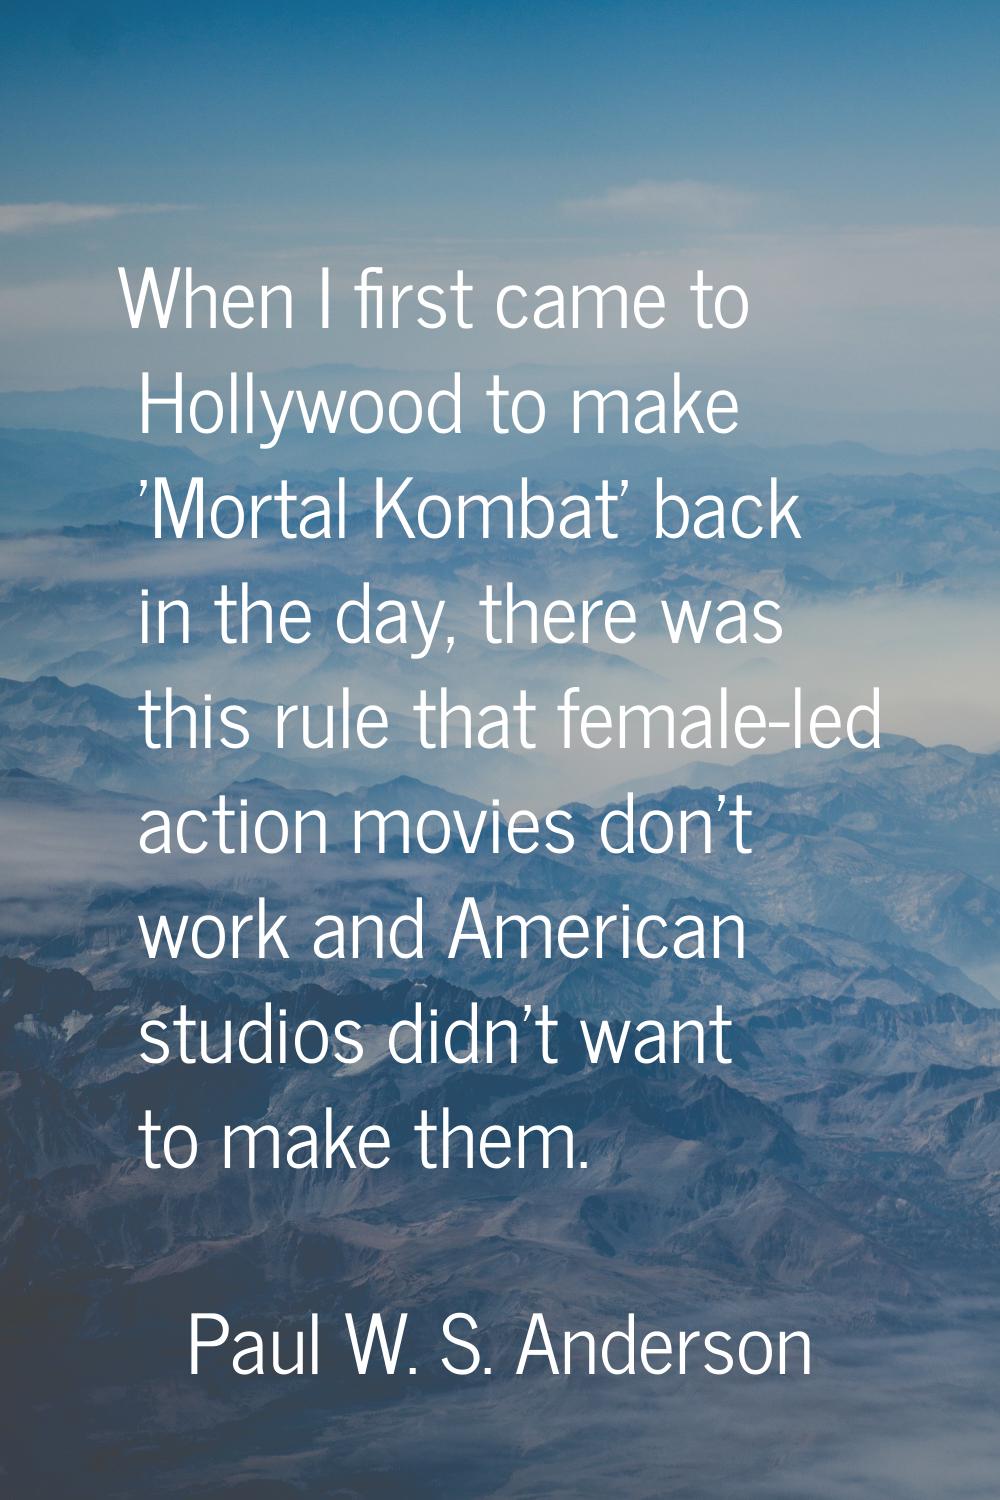 When I first came to Hollywood to make 'Mortal Kombat' back in the day, there was this rule that fe